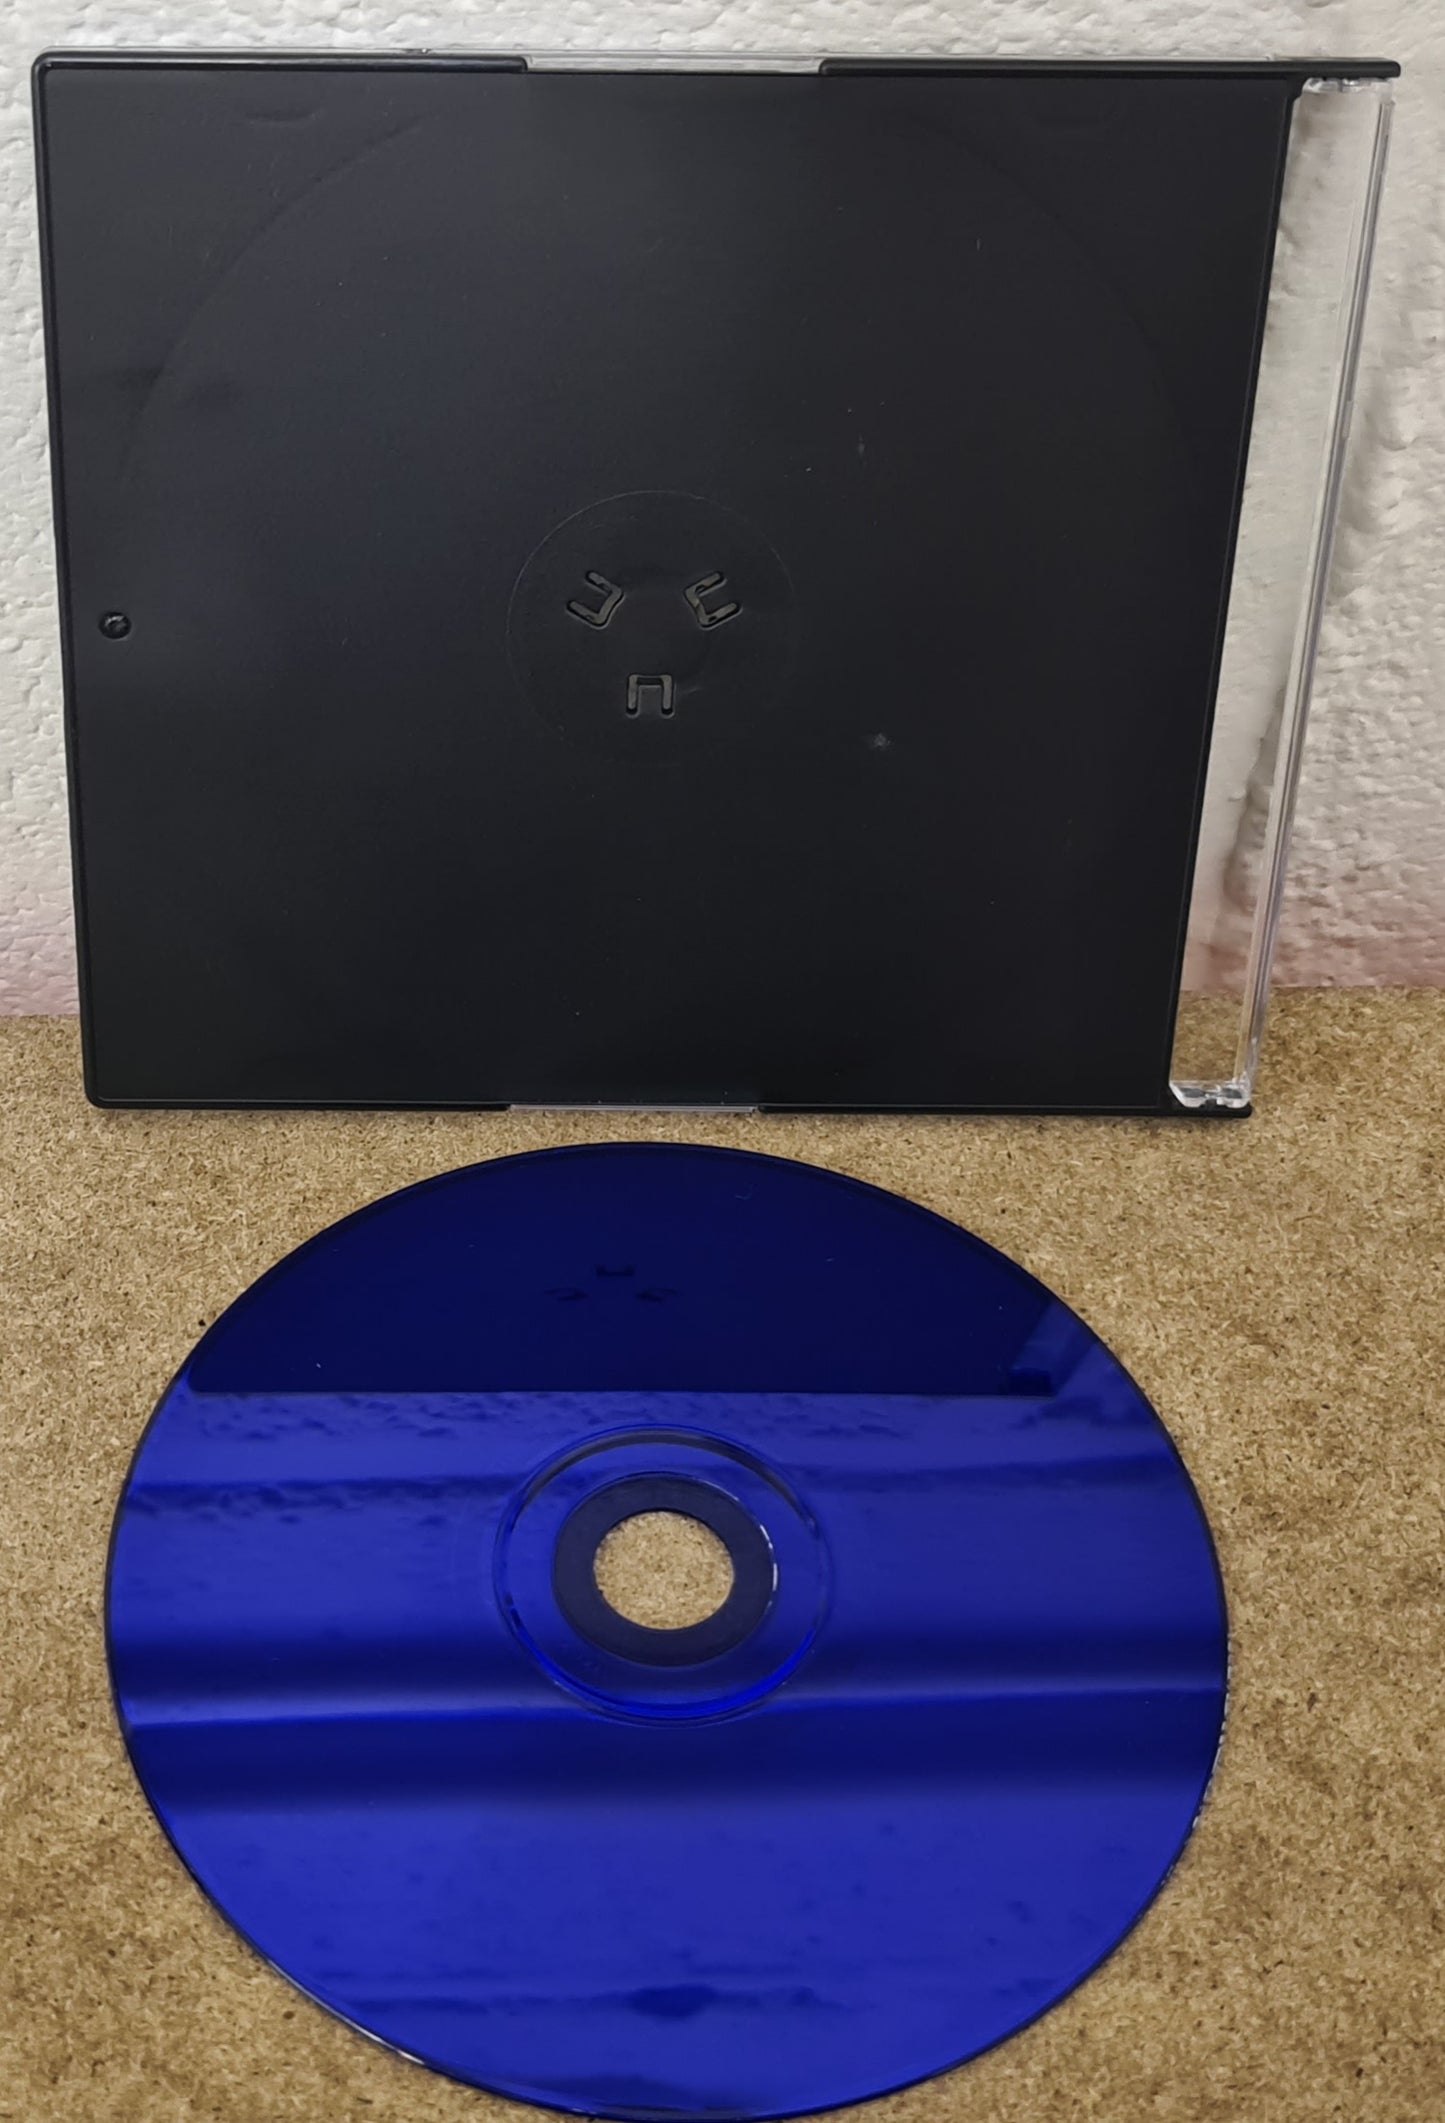 Mashed Drive to Survive Sony Playstation 2 (PS2) Game Disc Only